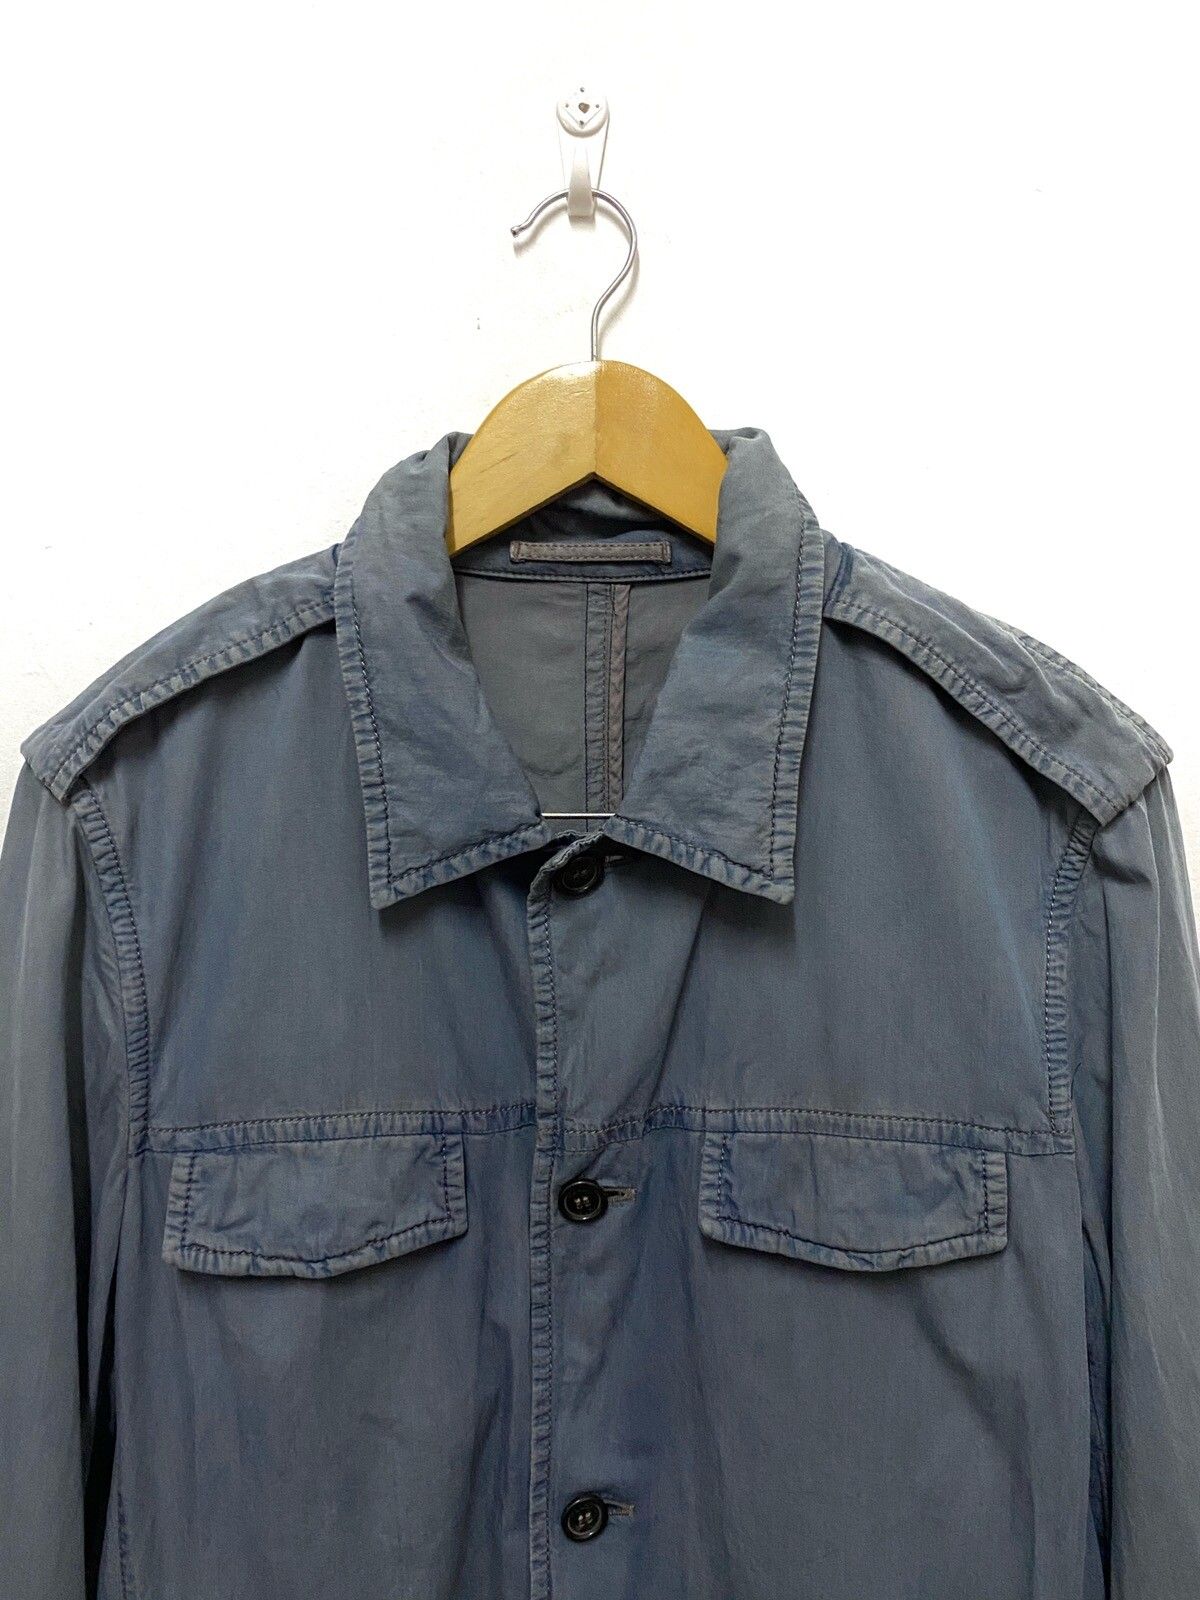 PRADA Button Up Multipocket Light Jacket Made in Italy - 2